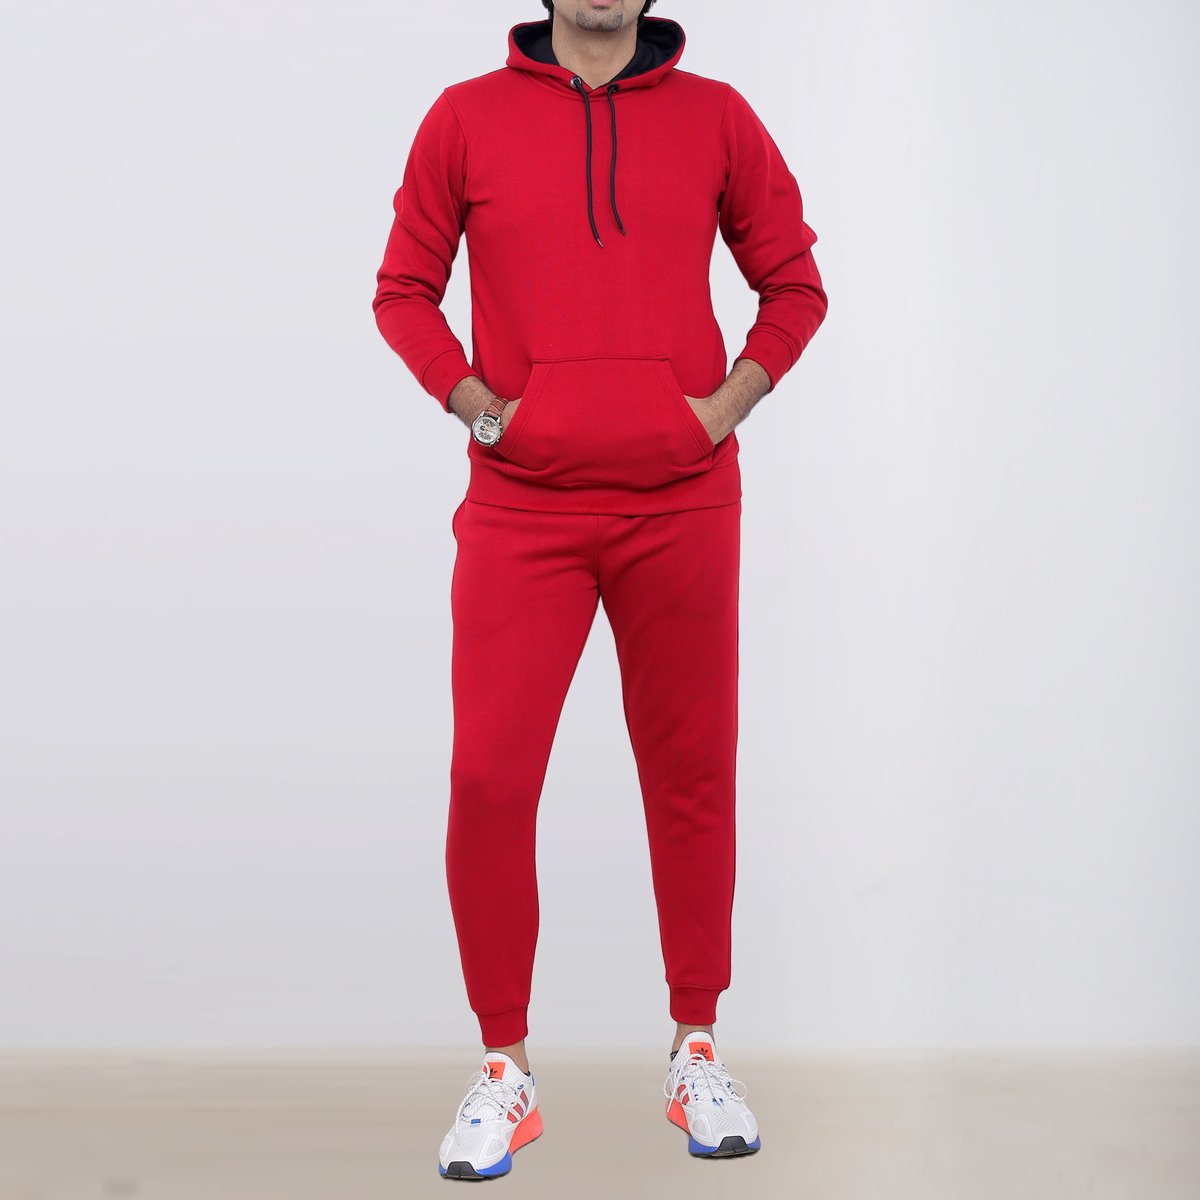 ICONICX Mens Plain Tracksuit Fleece Pullover Hoodie Pants Hooded Sweatshirt with Trousers Cotton Jogging Suit Exercise, Fitness, Boxing MMA, RED